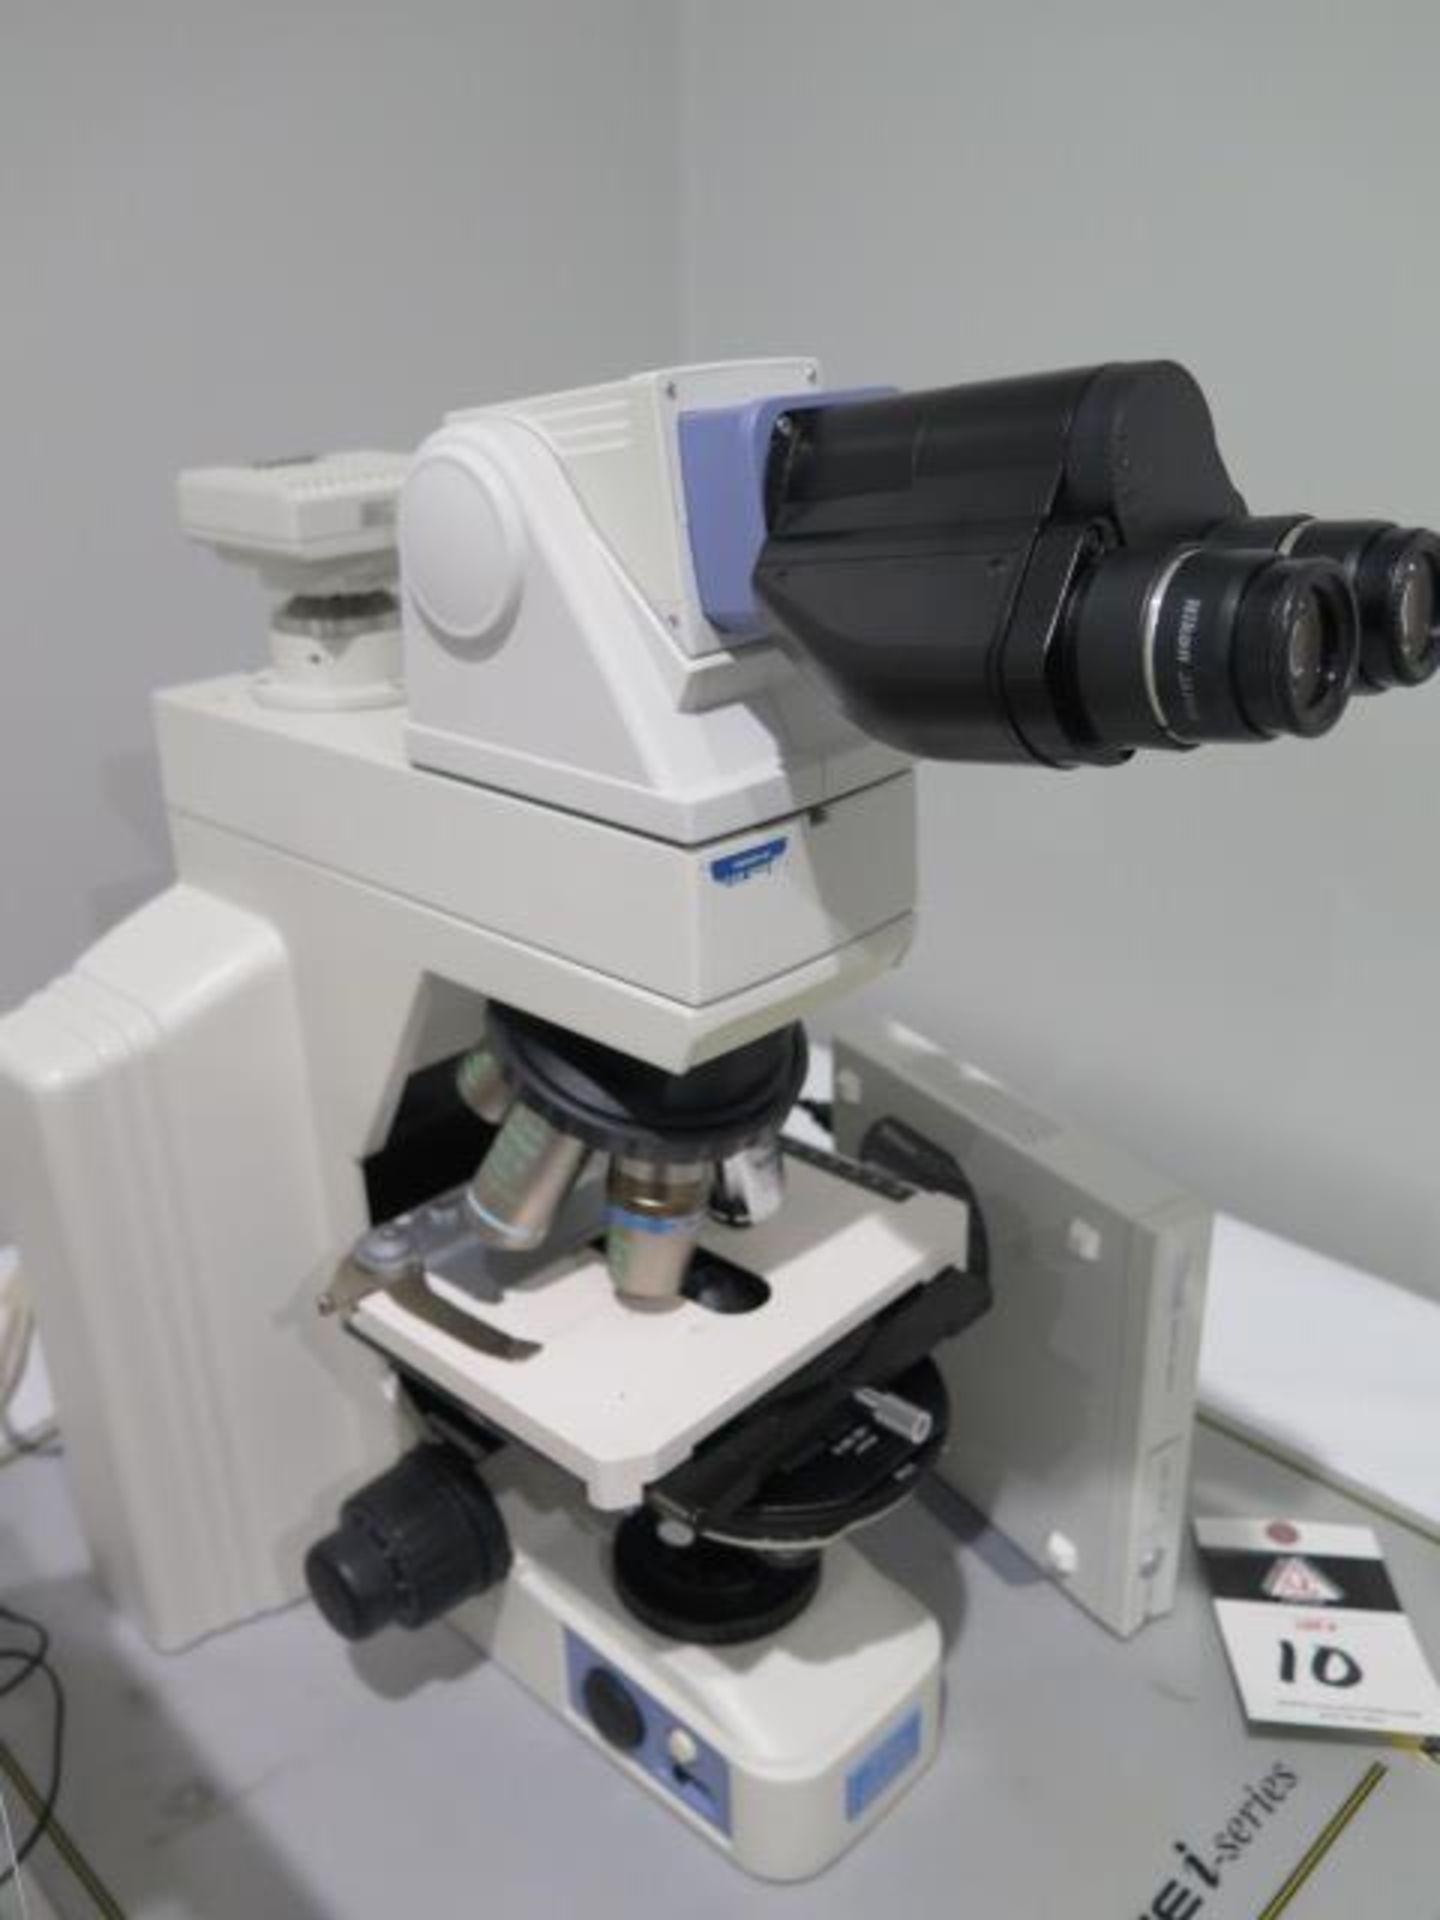 Nikon Eclipse E600 Research Microscope s/n 763673 w/ Nikon Light,DS-U2 Digital Sight Unit,SOLD AS IS - Image 3 of 15